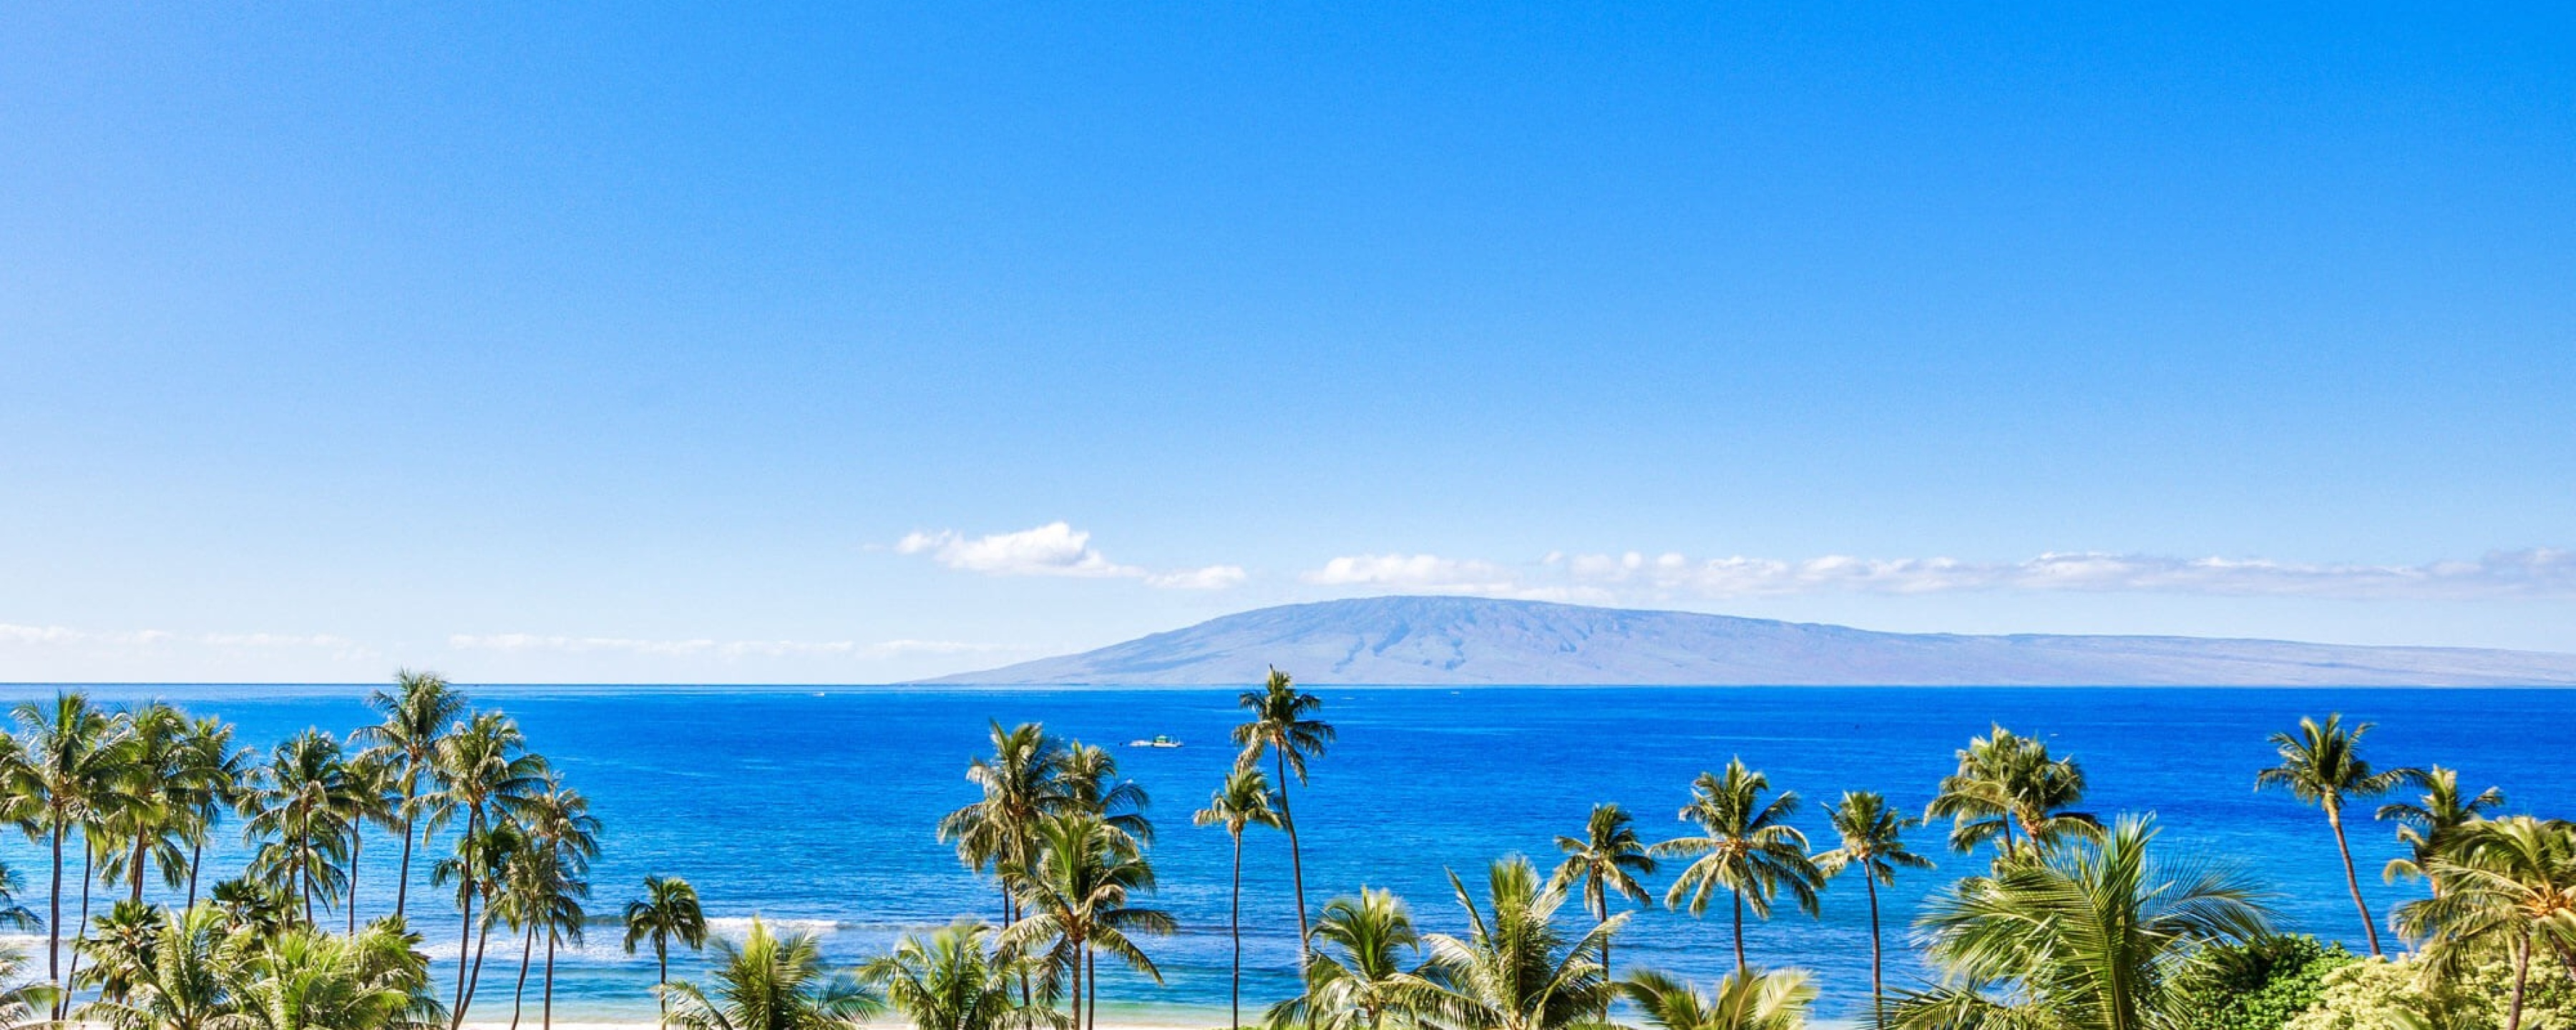 20 Gorgeous Photos of Maui That Will Inspire You to Book a Trip